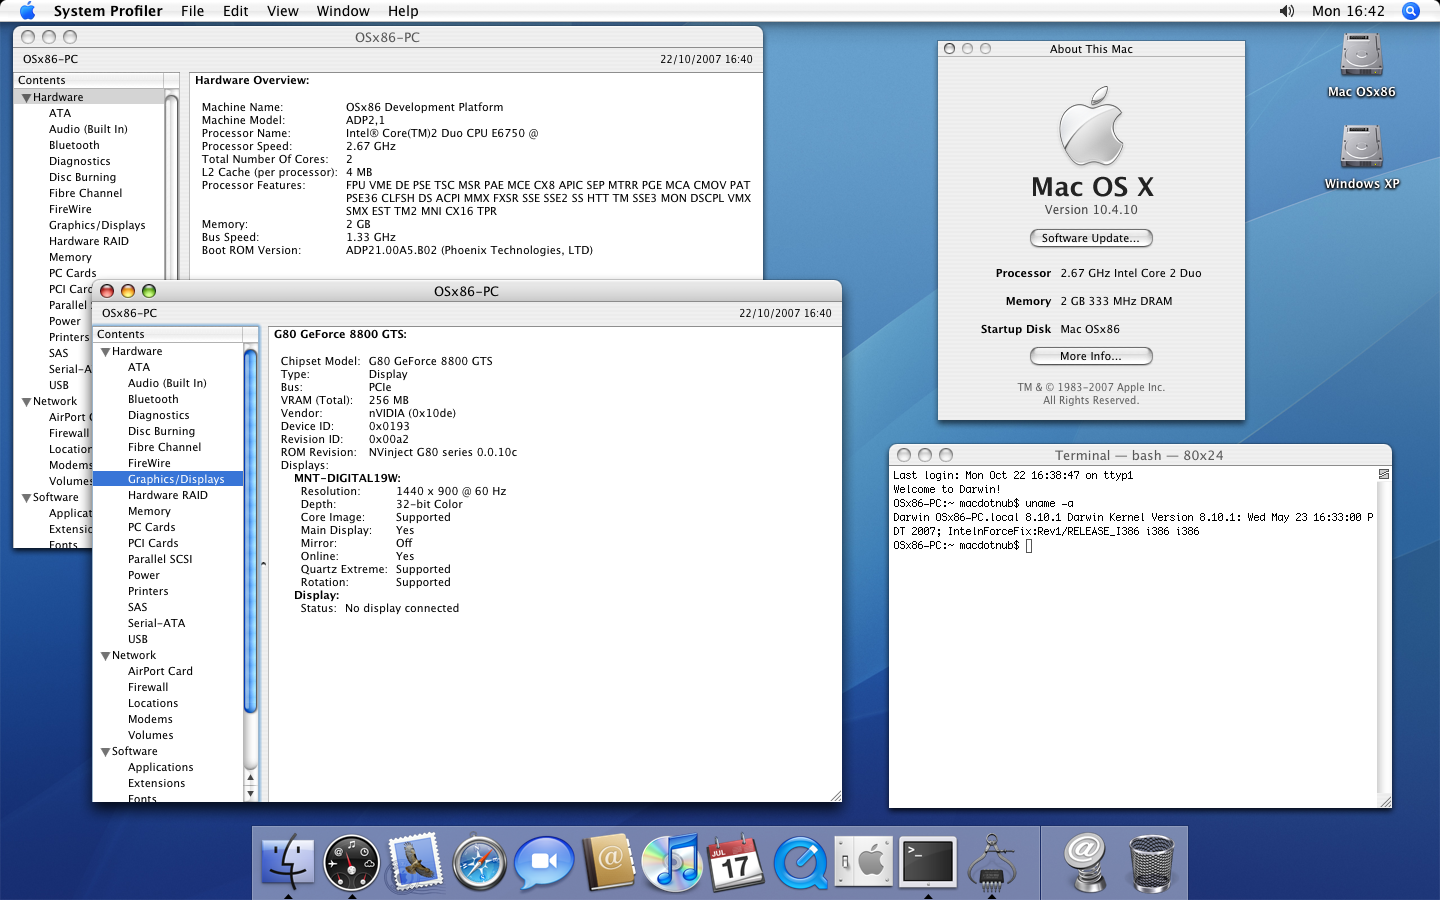 mac os 10.11 iso download